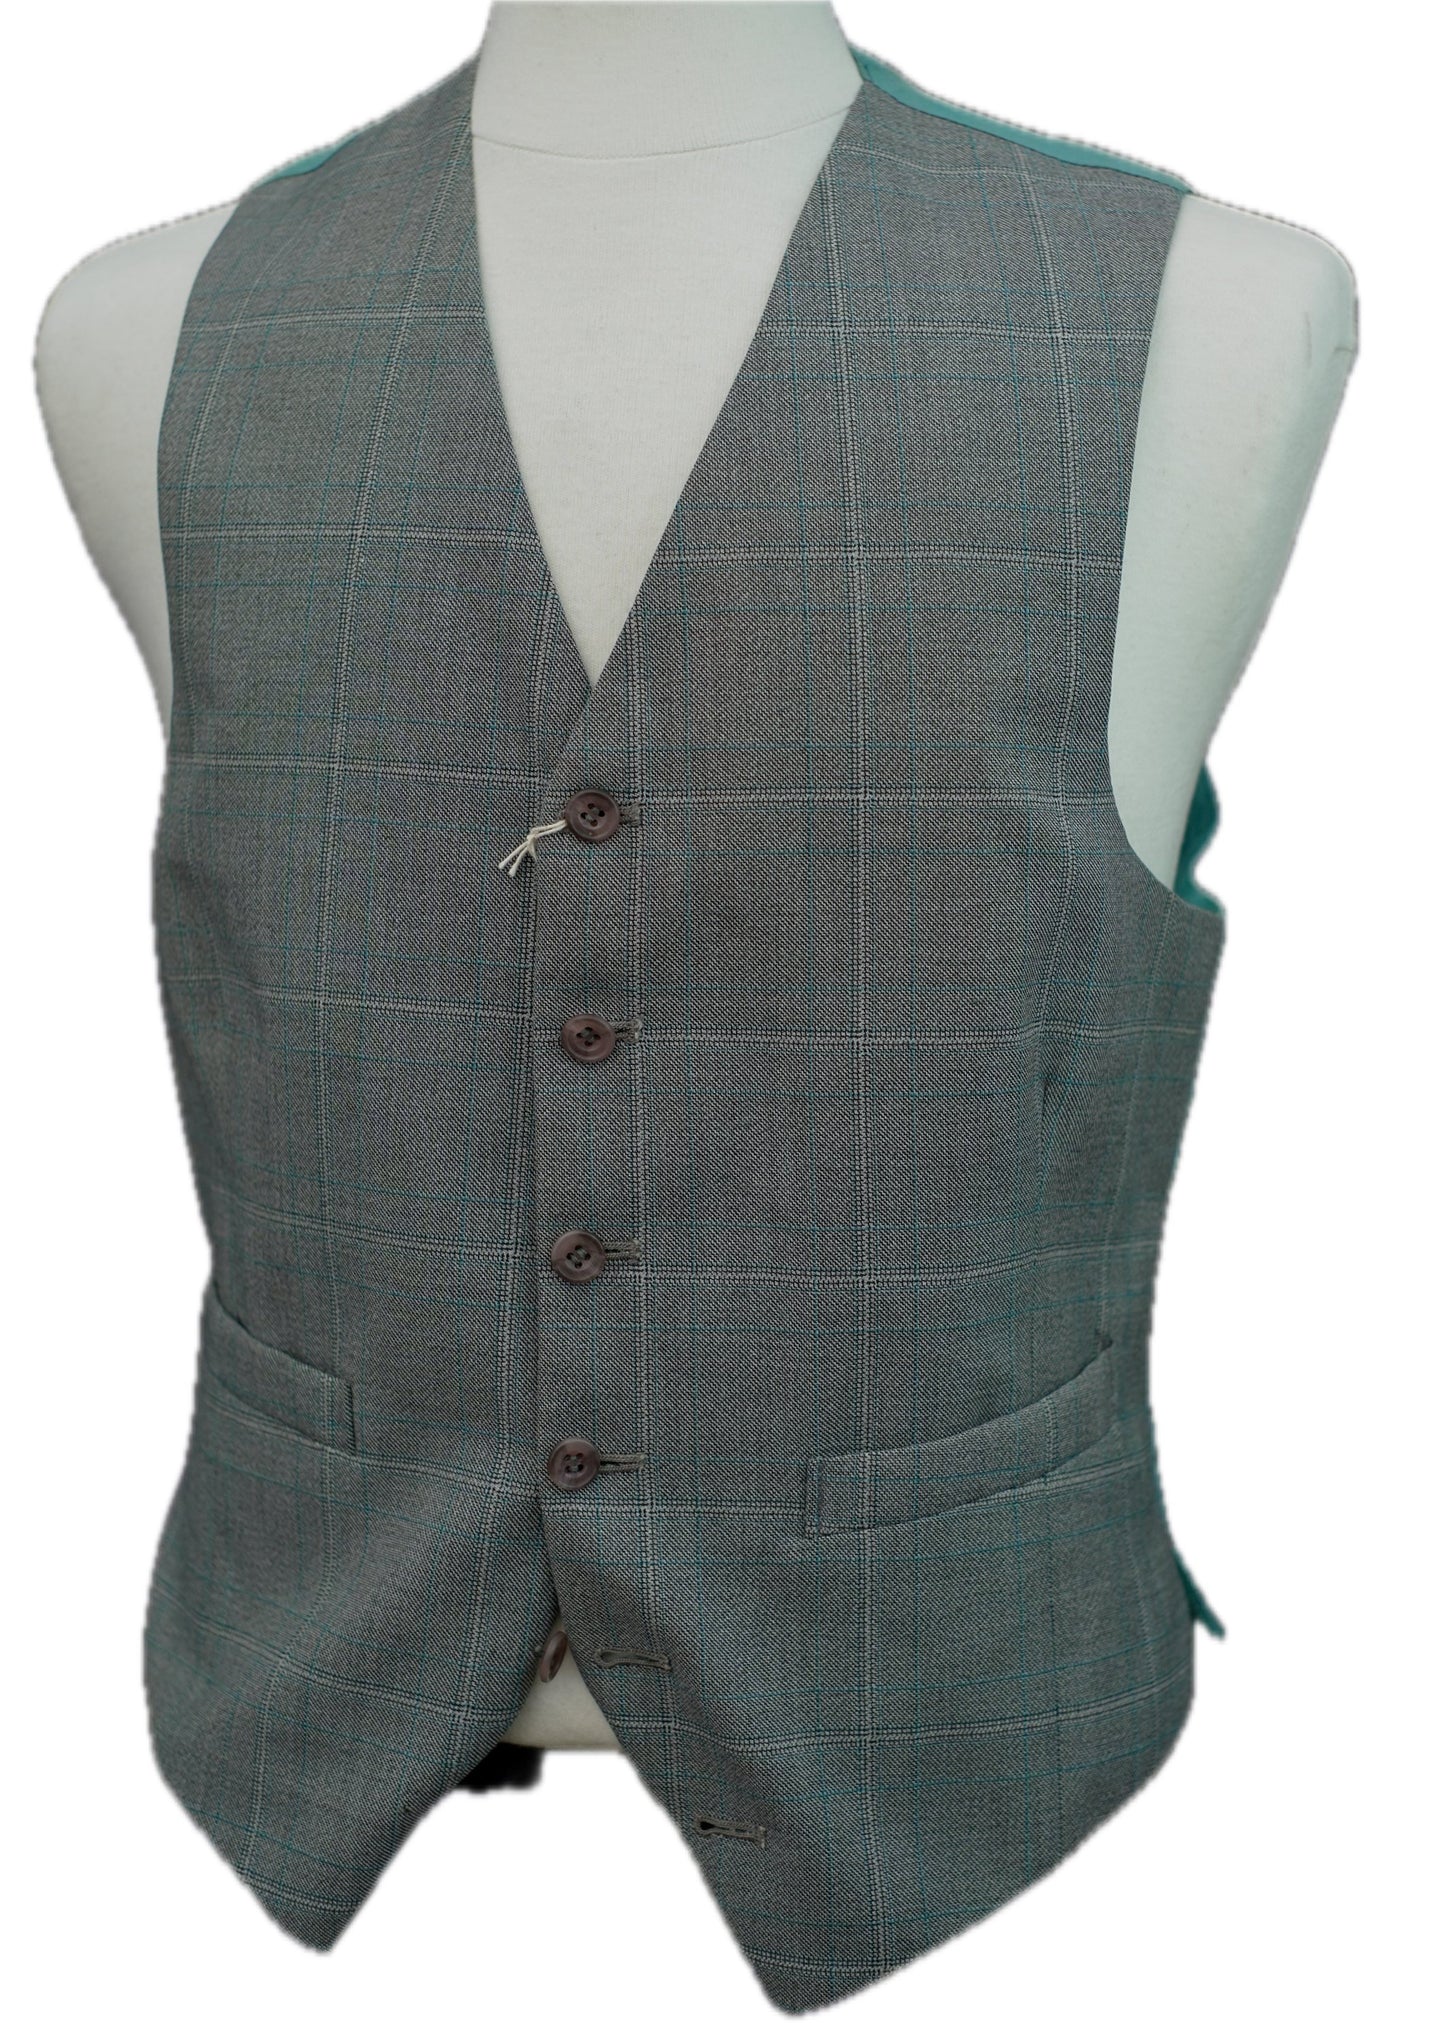 1970s Vintage Grey and Blue Check Waistcoat